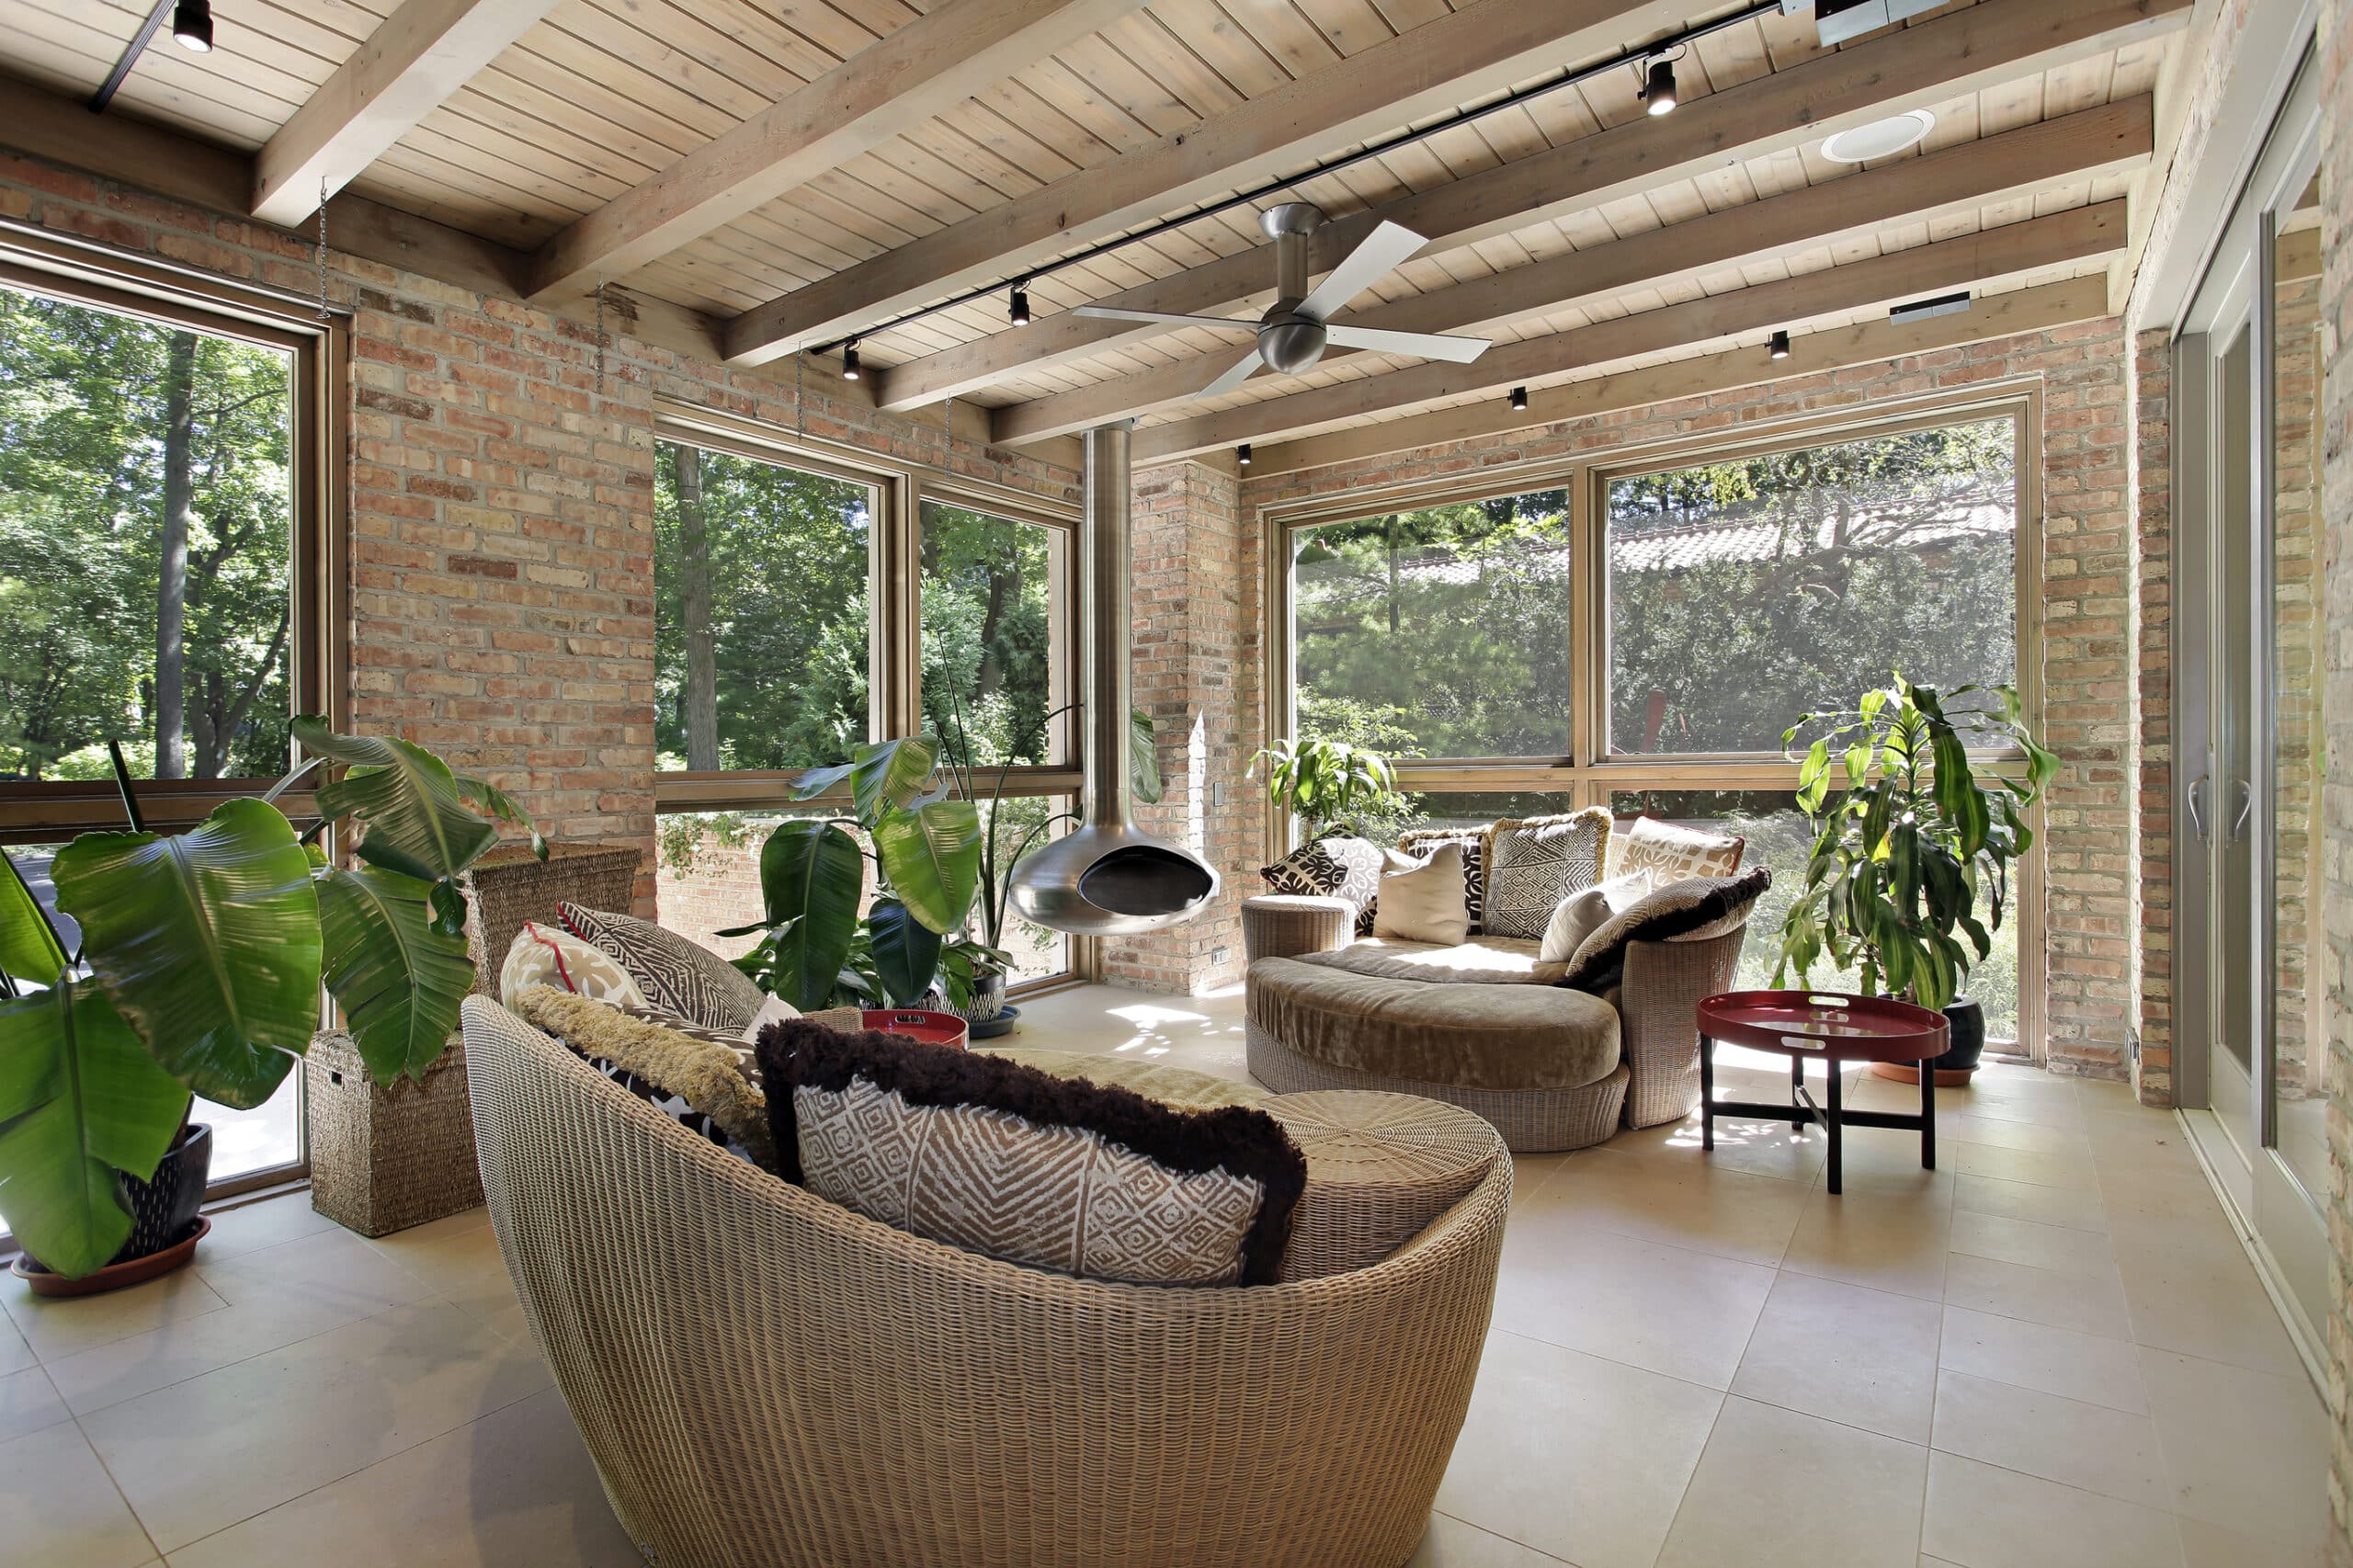 A beautiful brick sunroom with patio furniture and gentle natural lighting gives the perfect example for the sunroom builder's guide to dominating the competition.